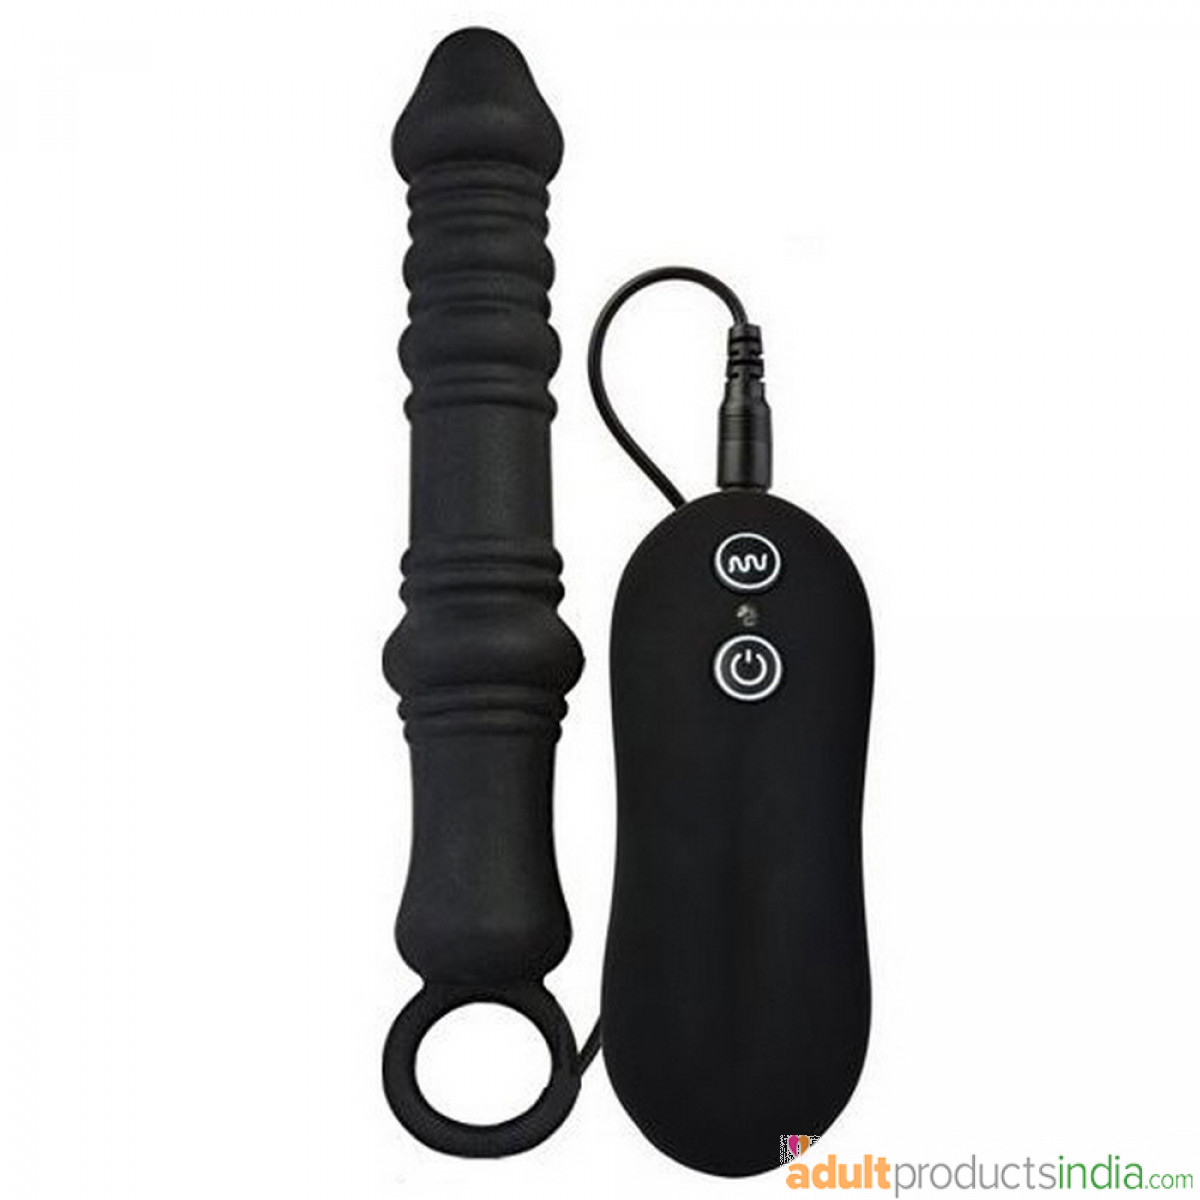 Prostate Anal Vibrator cannon - super soft silicone anal plug, with groove - strong vibration - Remote control with 10 vibration levels - G point P point black 